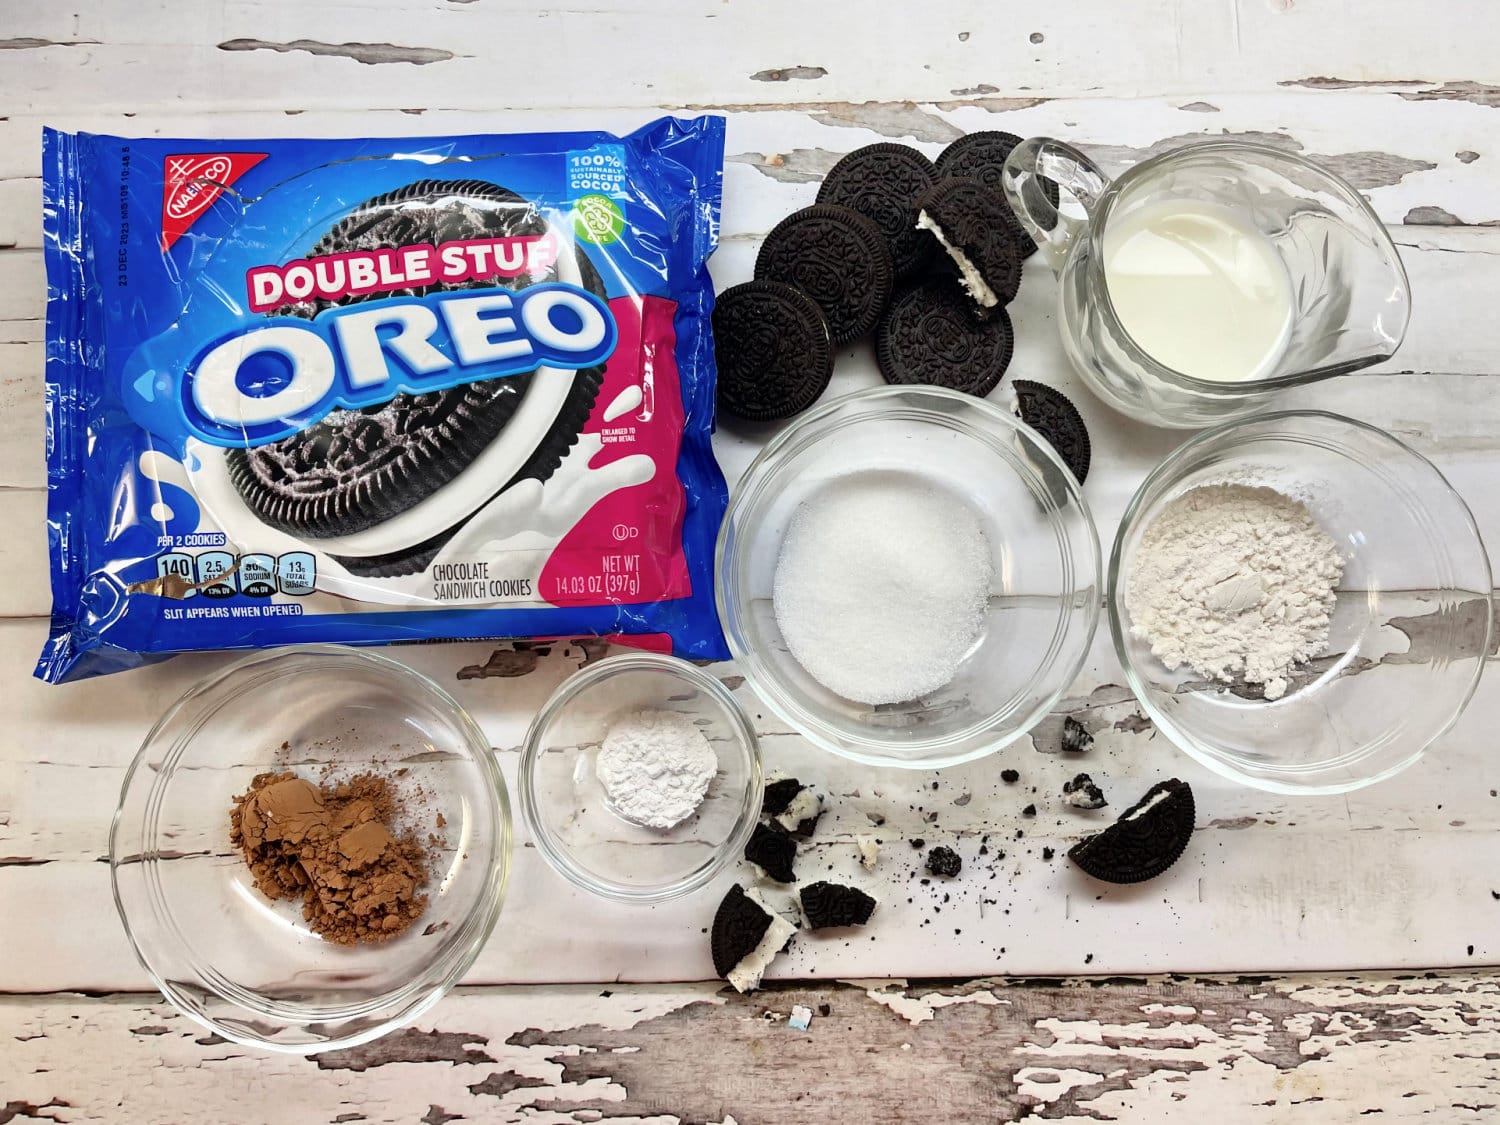 All the ingredients needed to make Oreo Mug Cakes. 